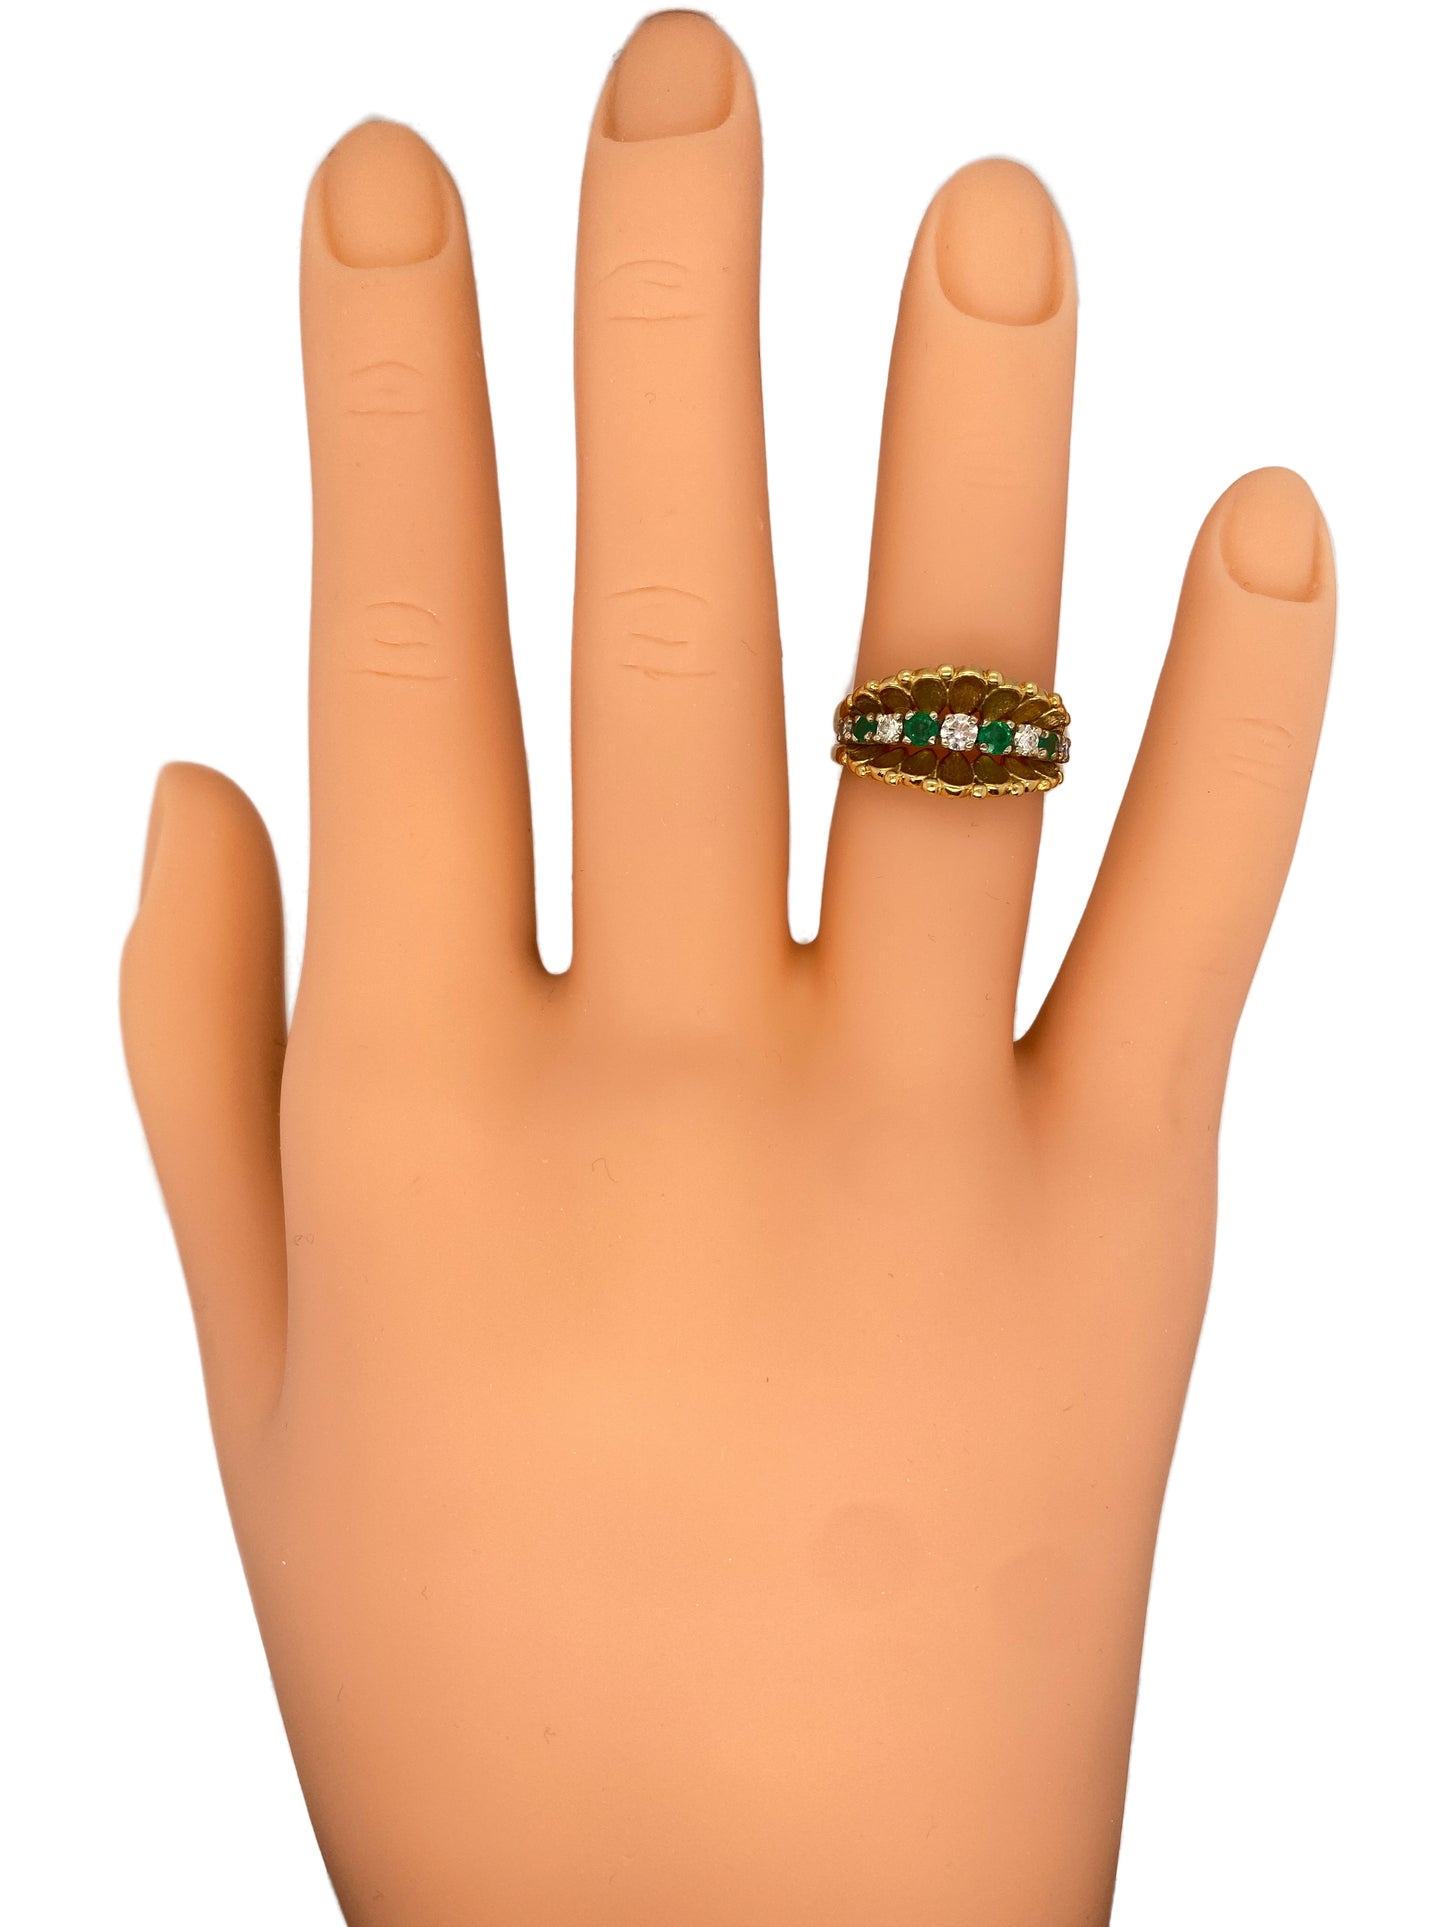 Circa 1980s Emerald and Diamond Scalloped Motif Ring in 18K Gold